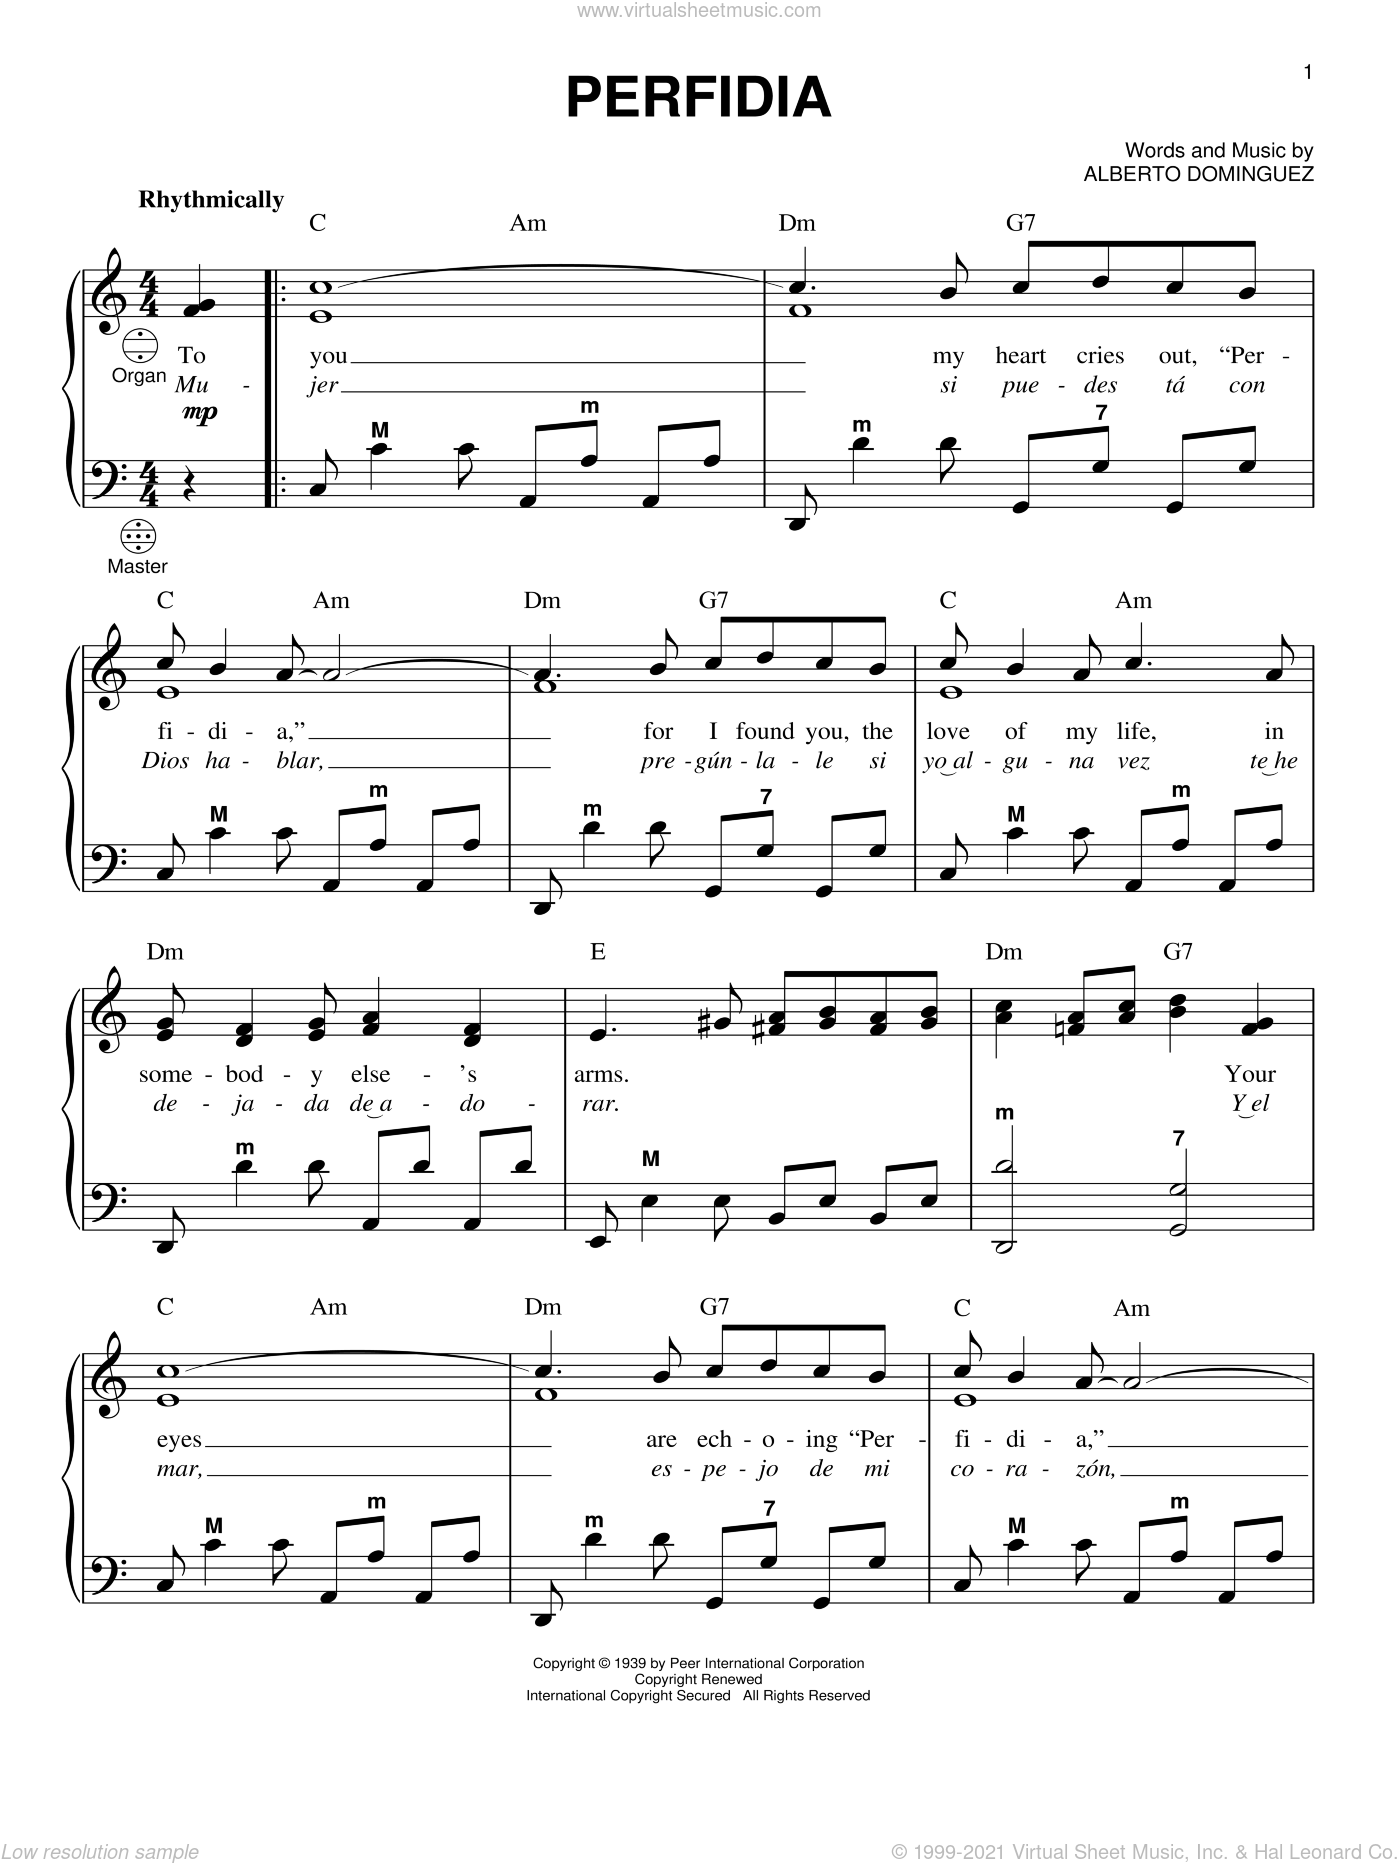 Dominguez - Perfidia sheet music for accordion [PDF-interactive]